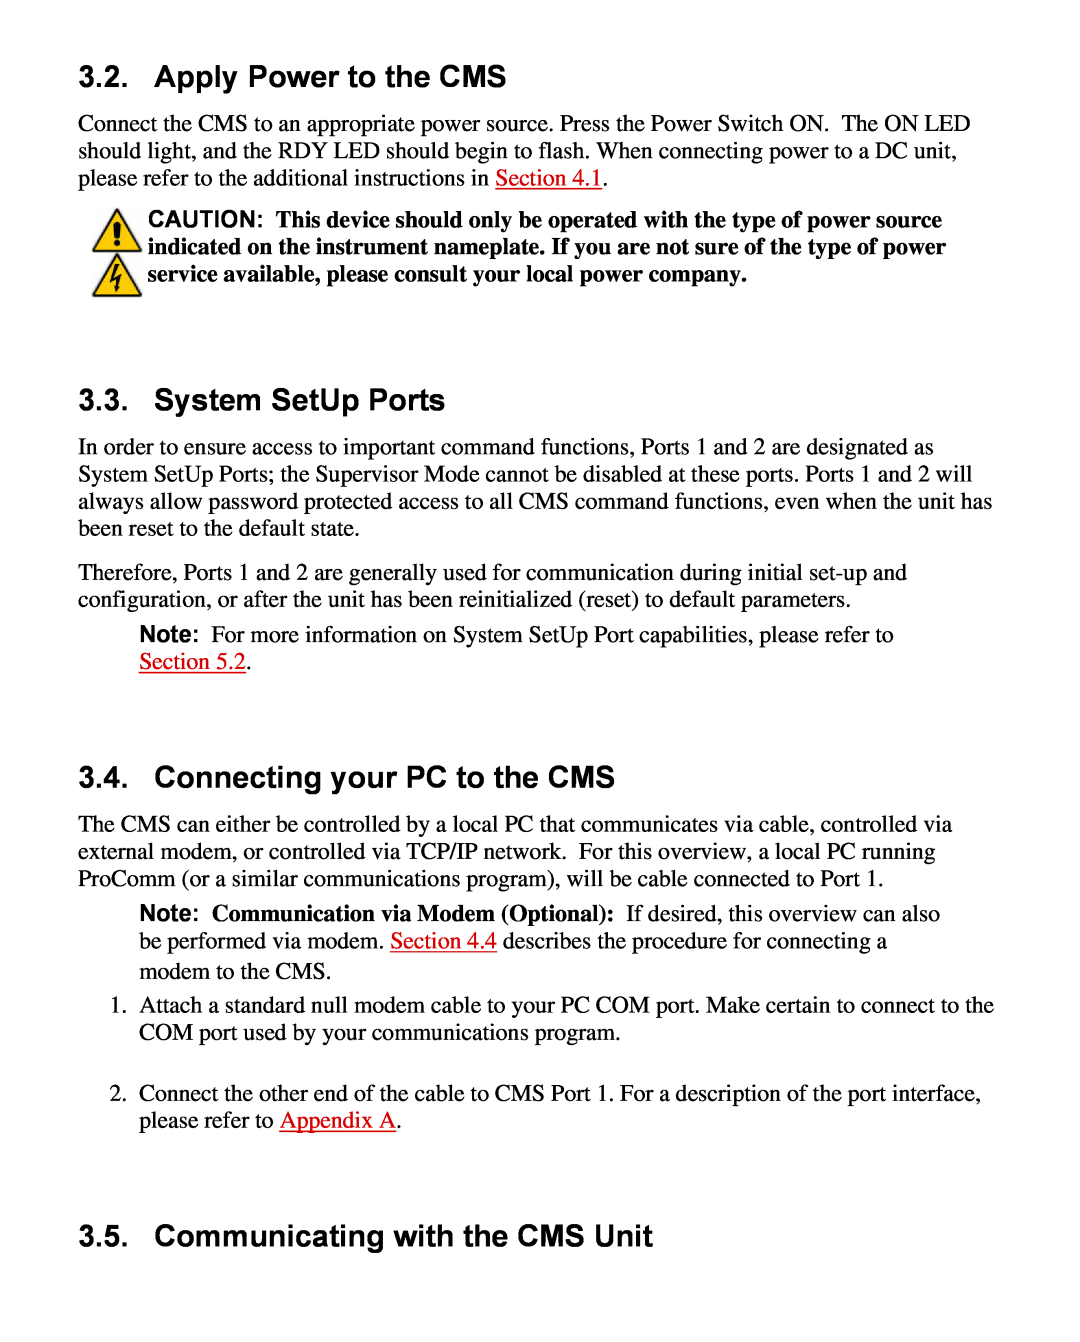 Western Telematic CMS-16 manual Apply Power to the CMS, System SetUp Ports, Connecting your PC to the CMS 